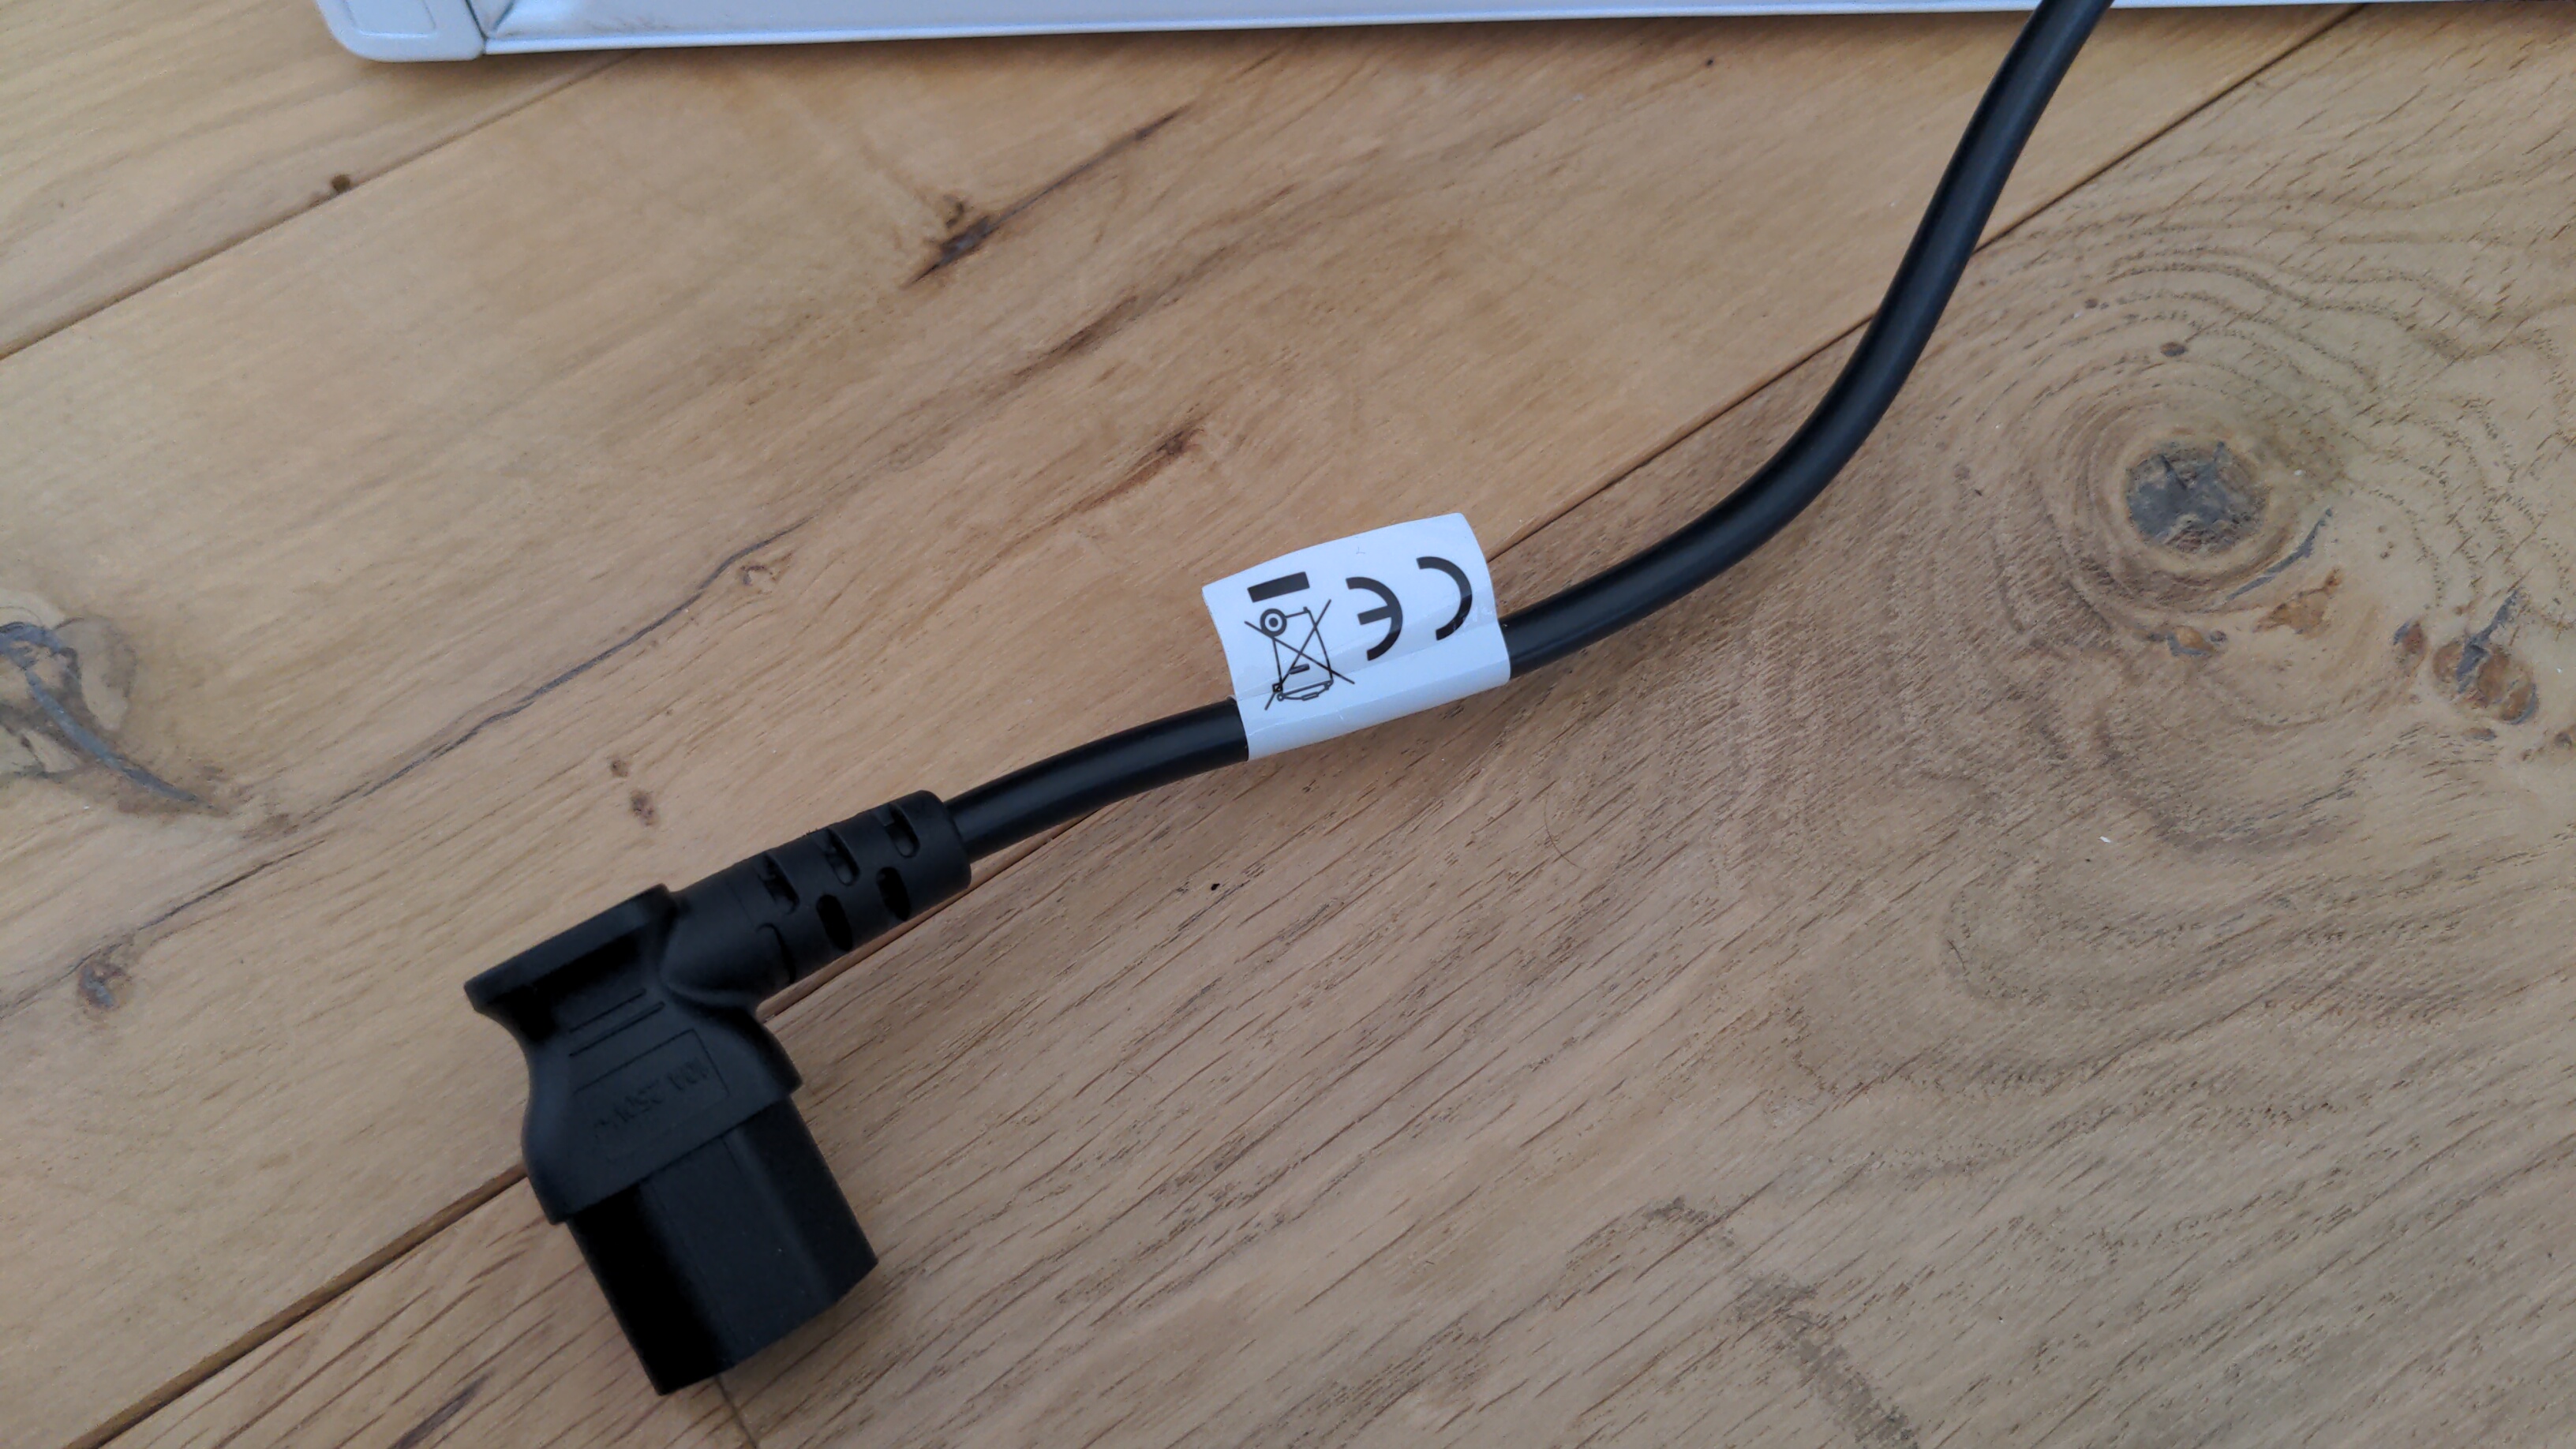 The cable, with a CE sticker on it